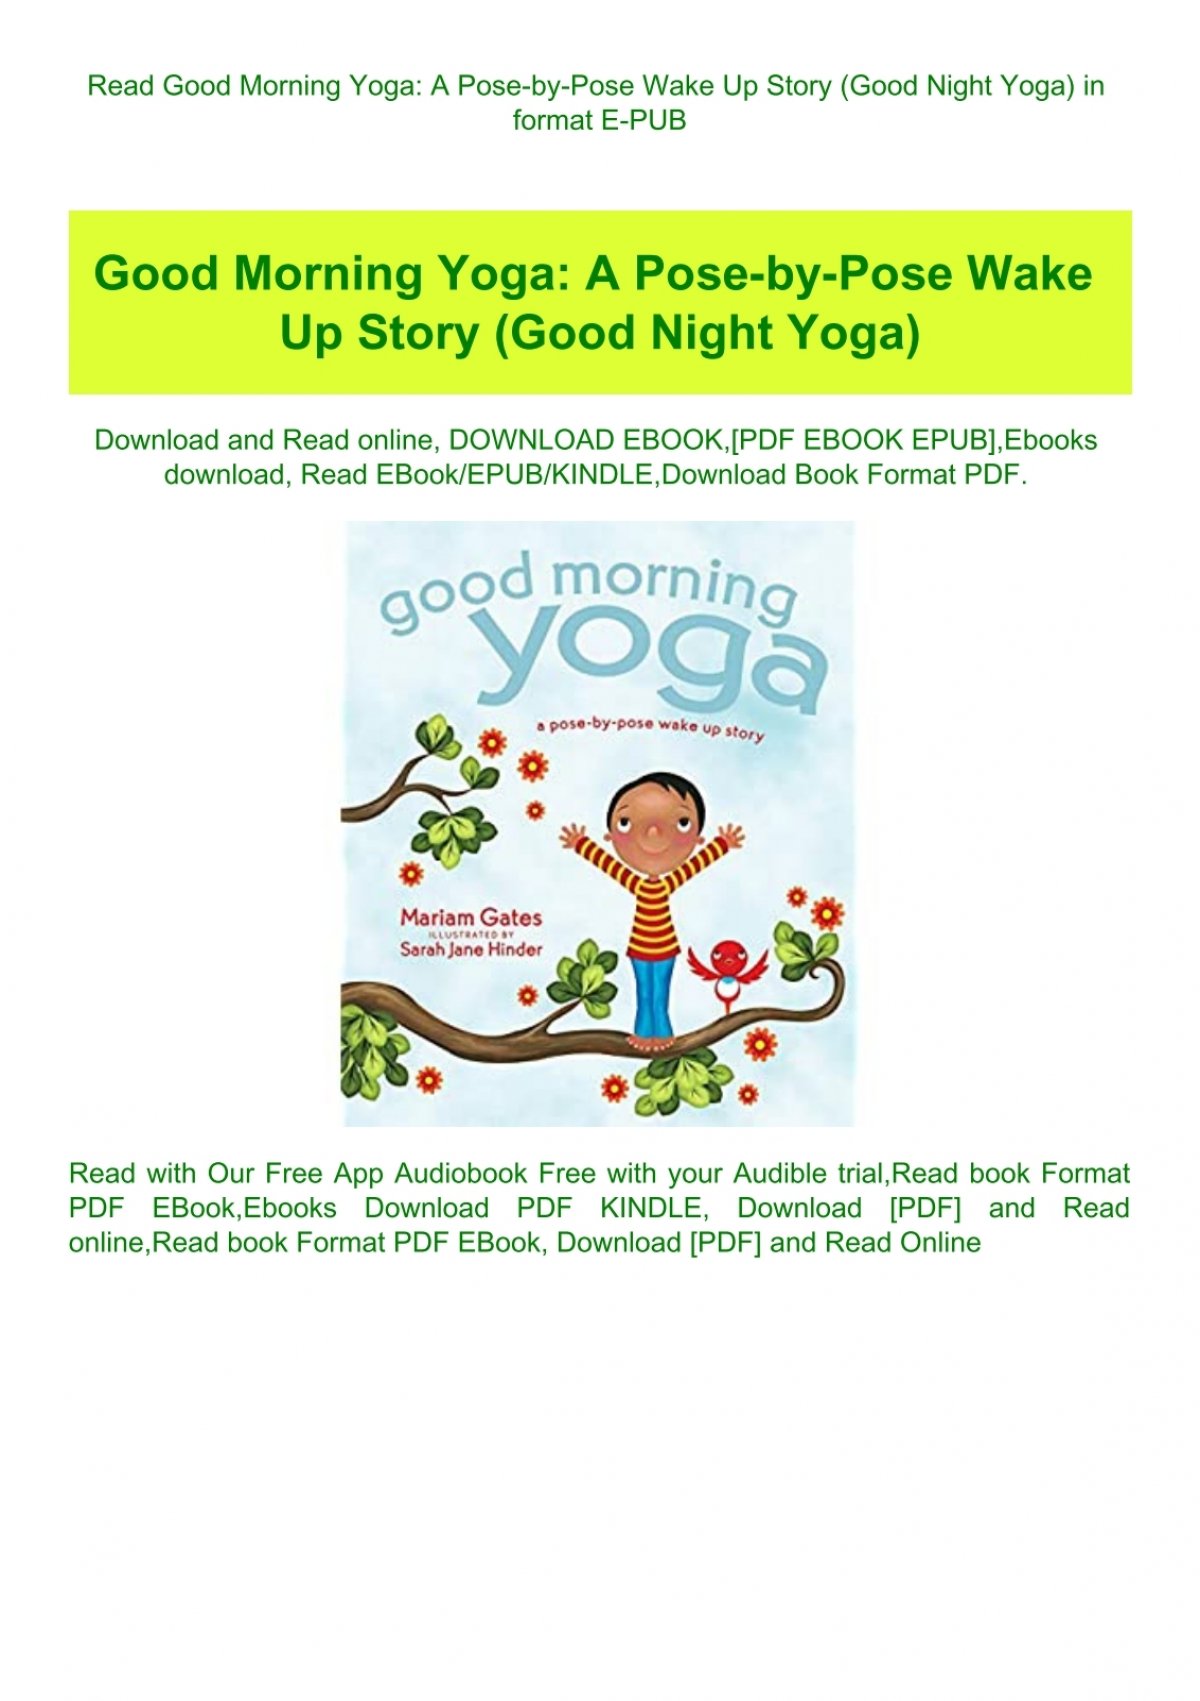 Good Night Yoga (a pose-by-pose bedtime story) READ ALOUD! - YouTube